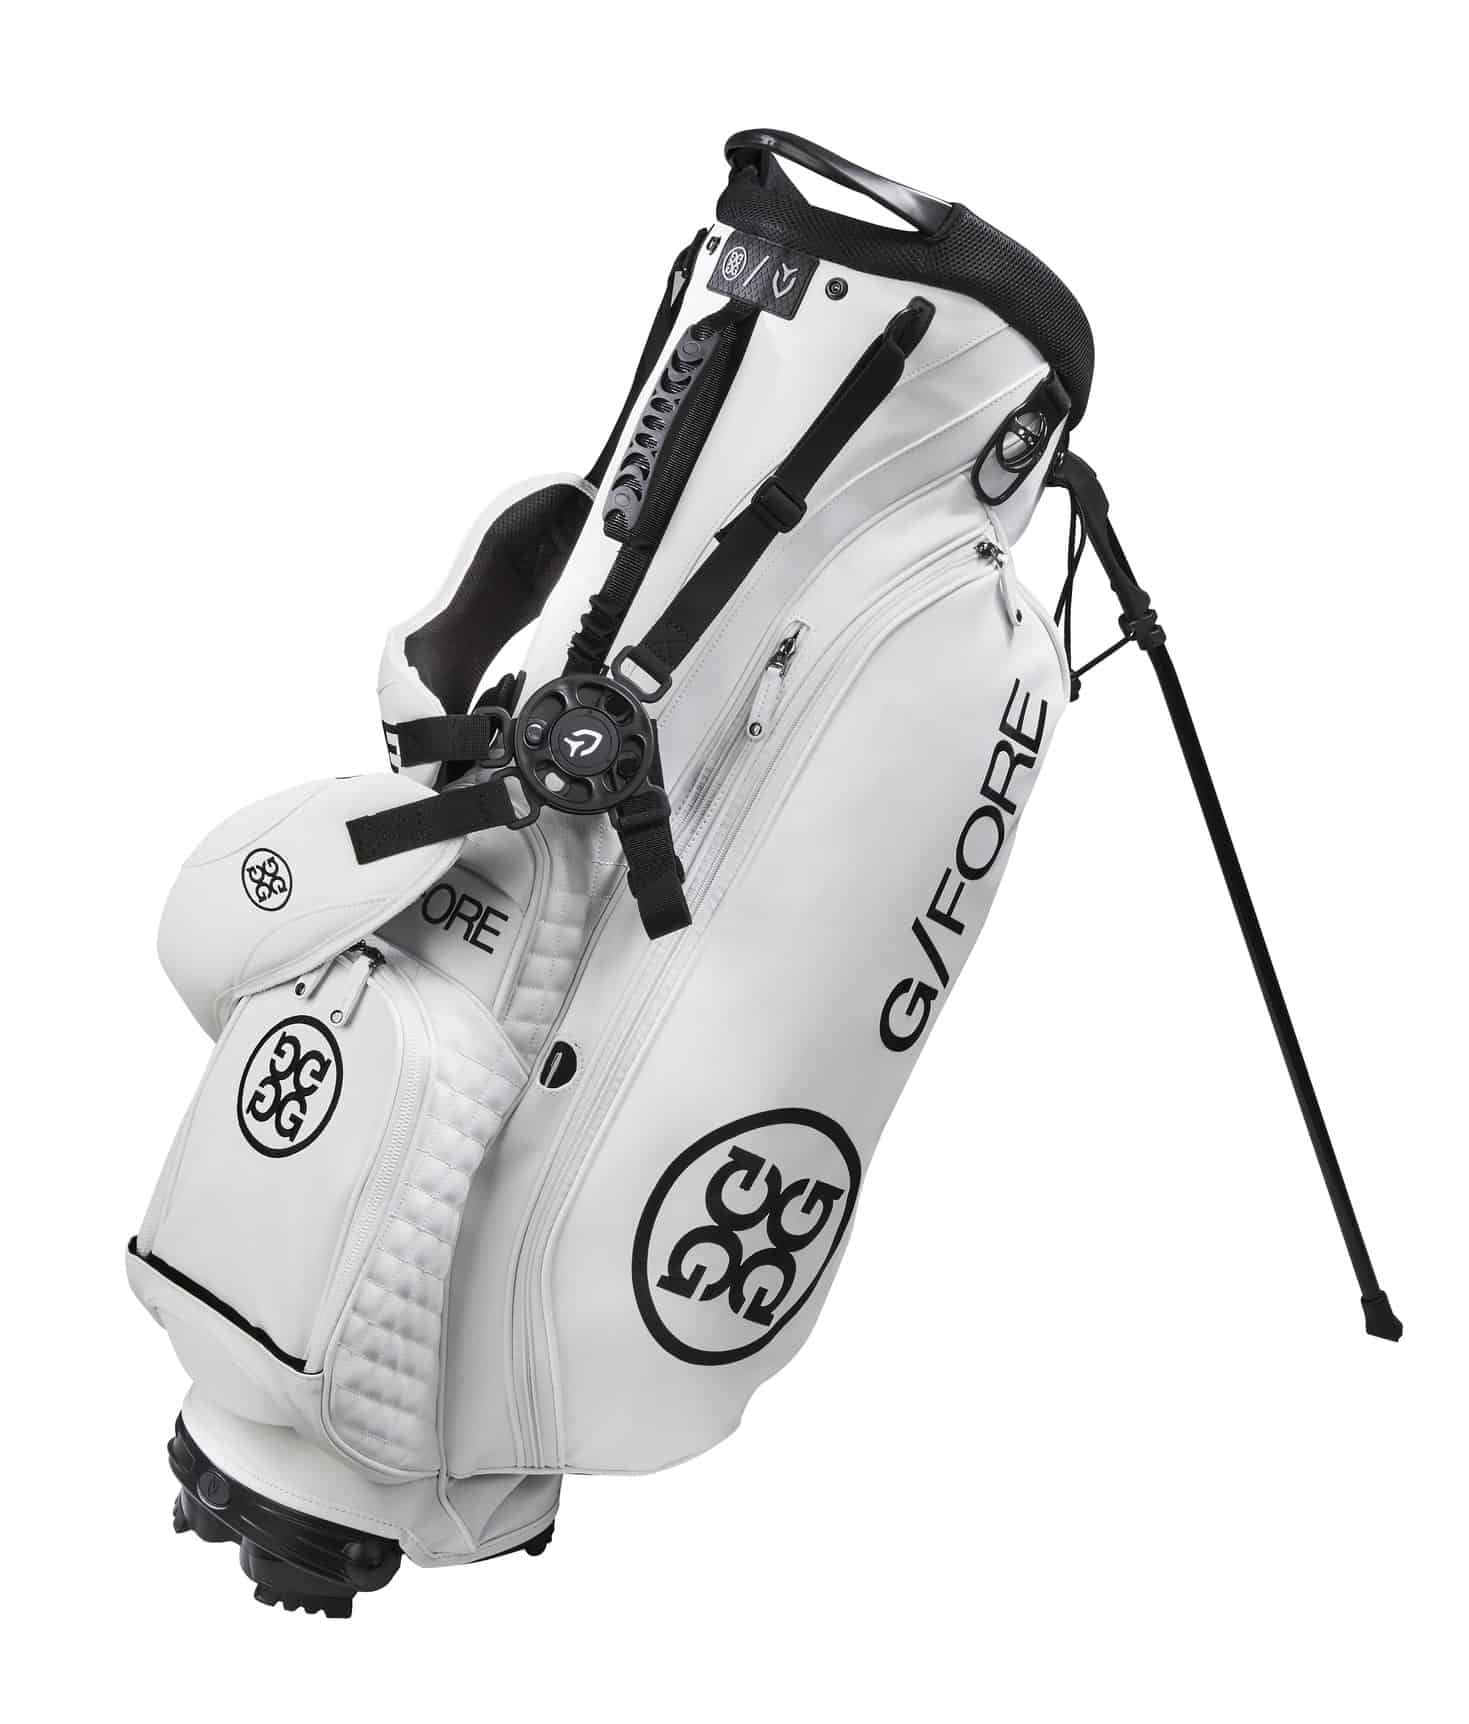 G/FORE Transporter II Bag   G/FORE Introduces the Transporter II Bag